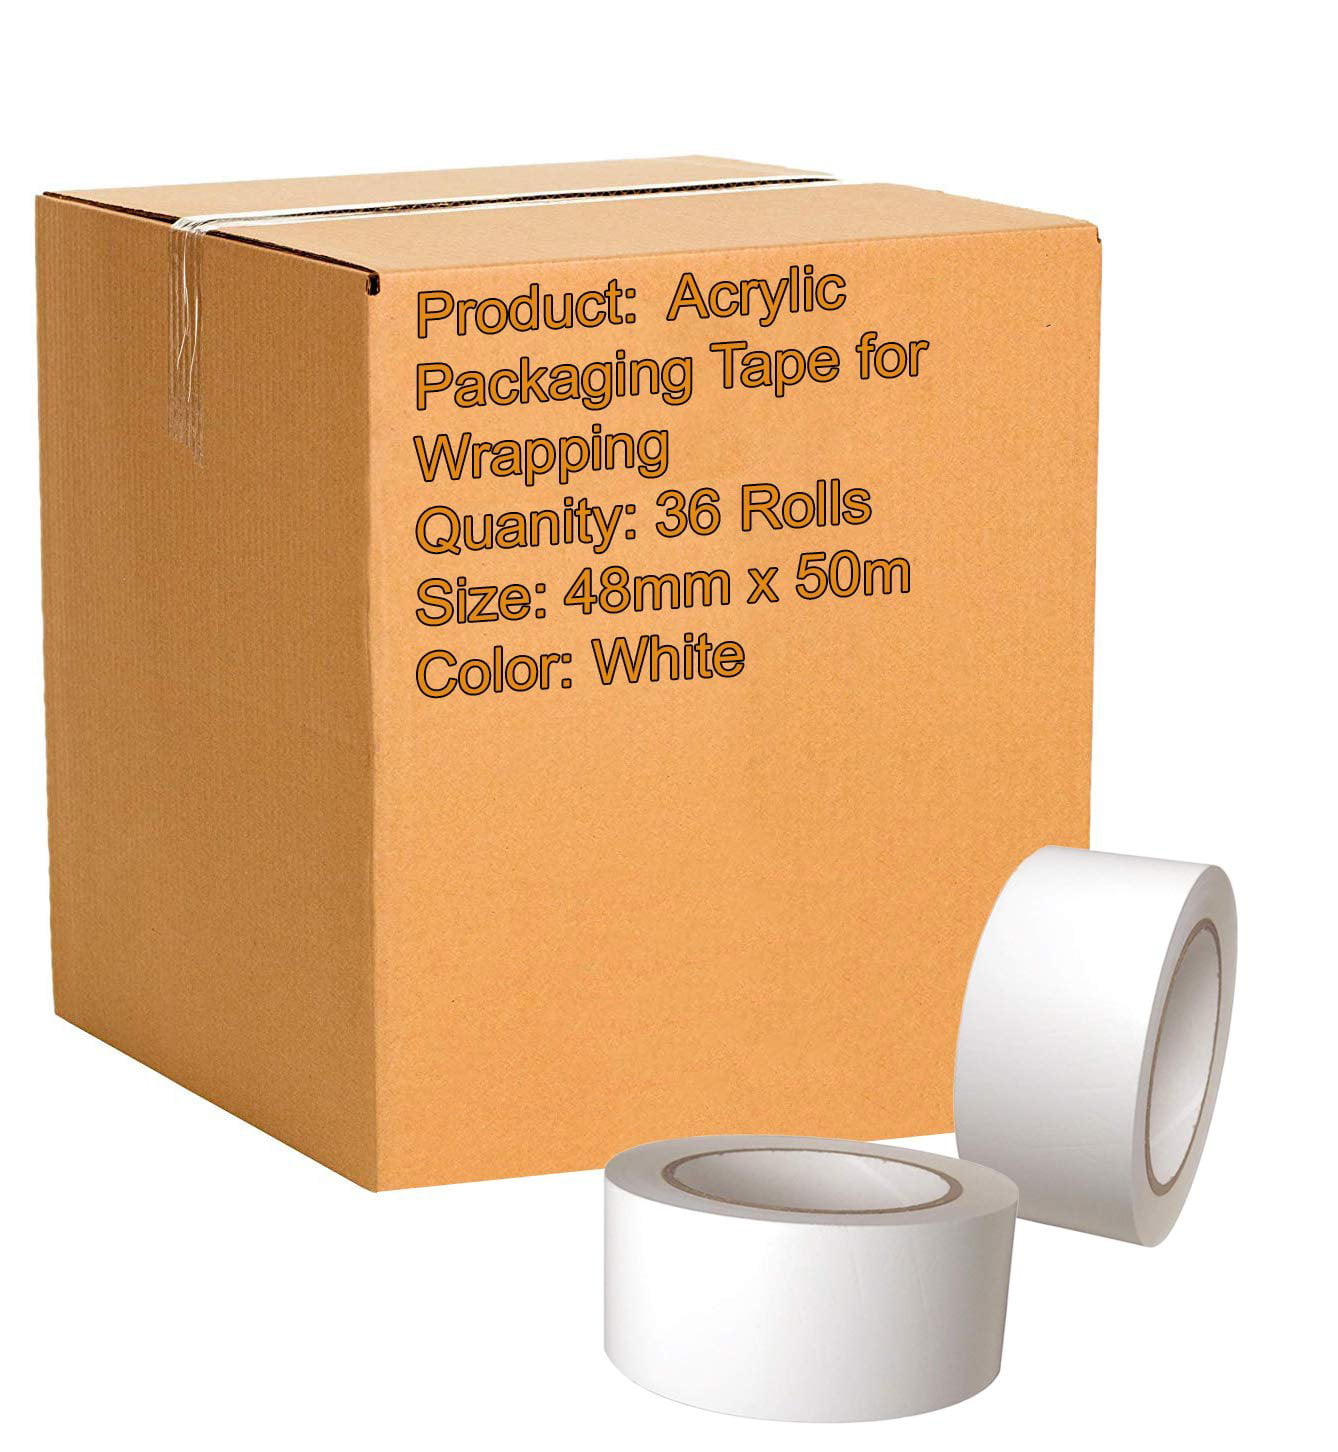 Extra Strong & Sticky Brown Packing Tape Packaging 48mm x 66m 36 Rolls 1 Box 